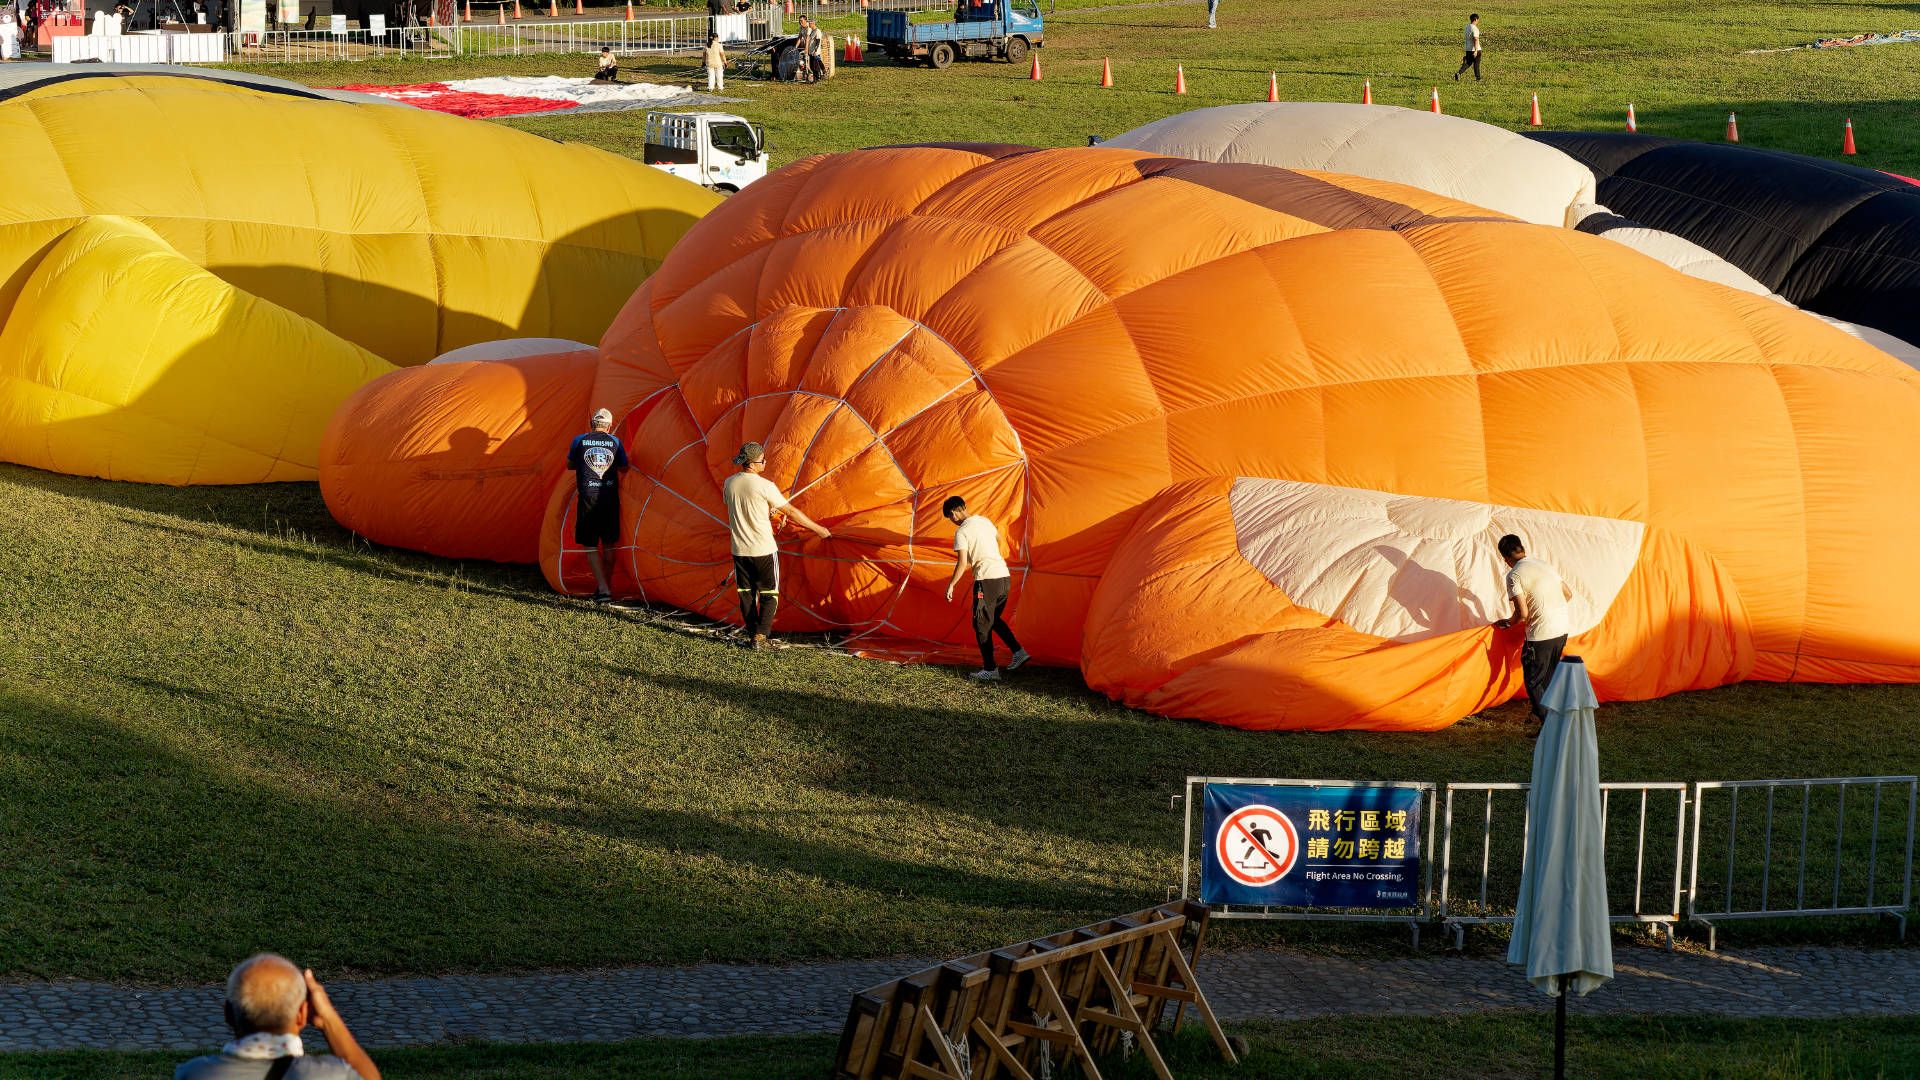 A partially-inflated hot air ballon. Four people are holding various parts of the balloon as it inflates. At this stage, it is still laying across the grass.